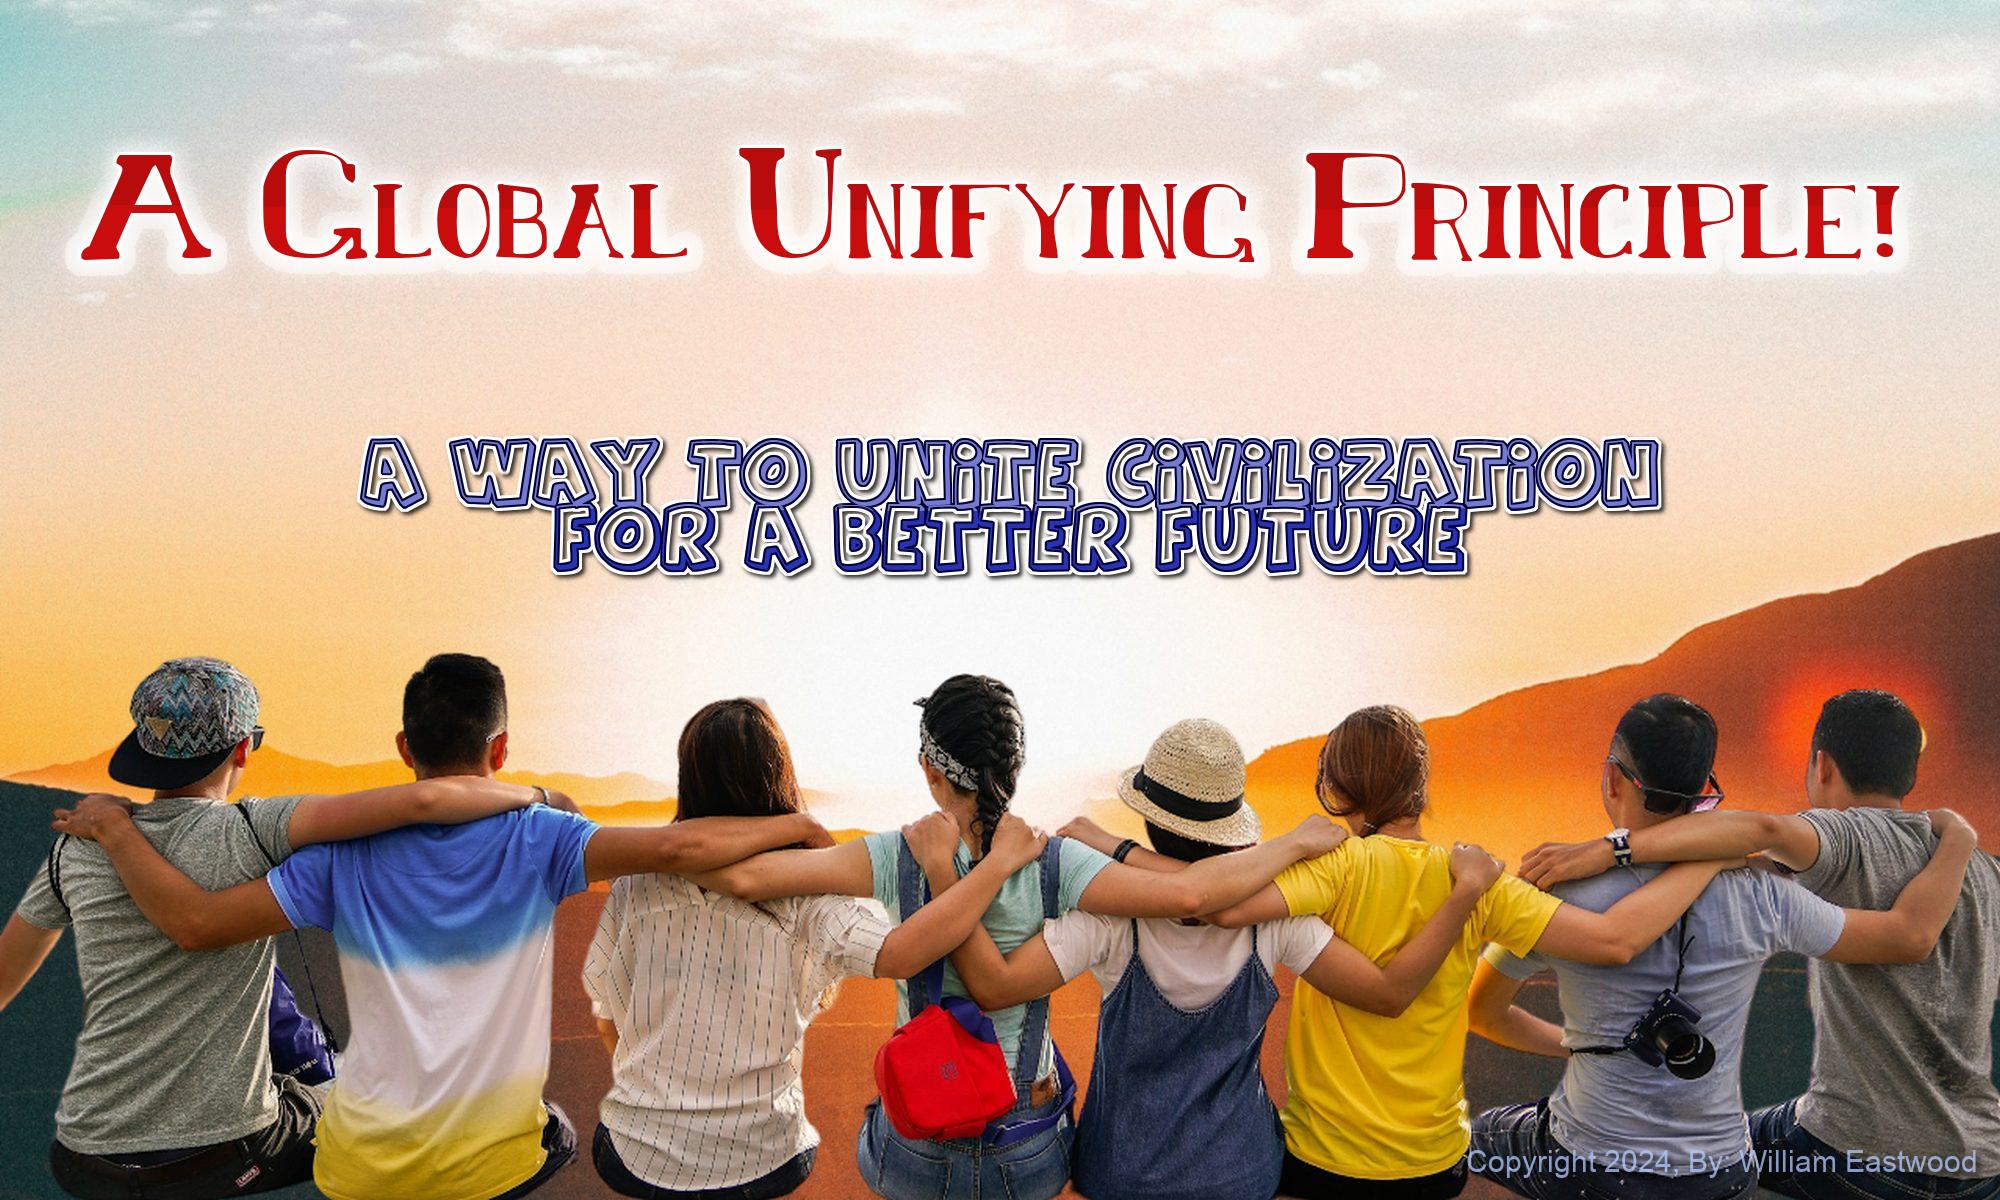 What Is a Unifying Principle? A Way to Unite Civilization & Create a New Future